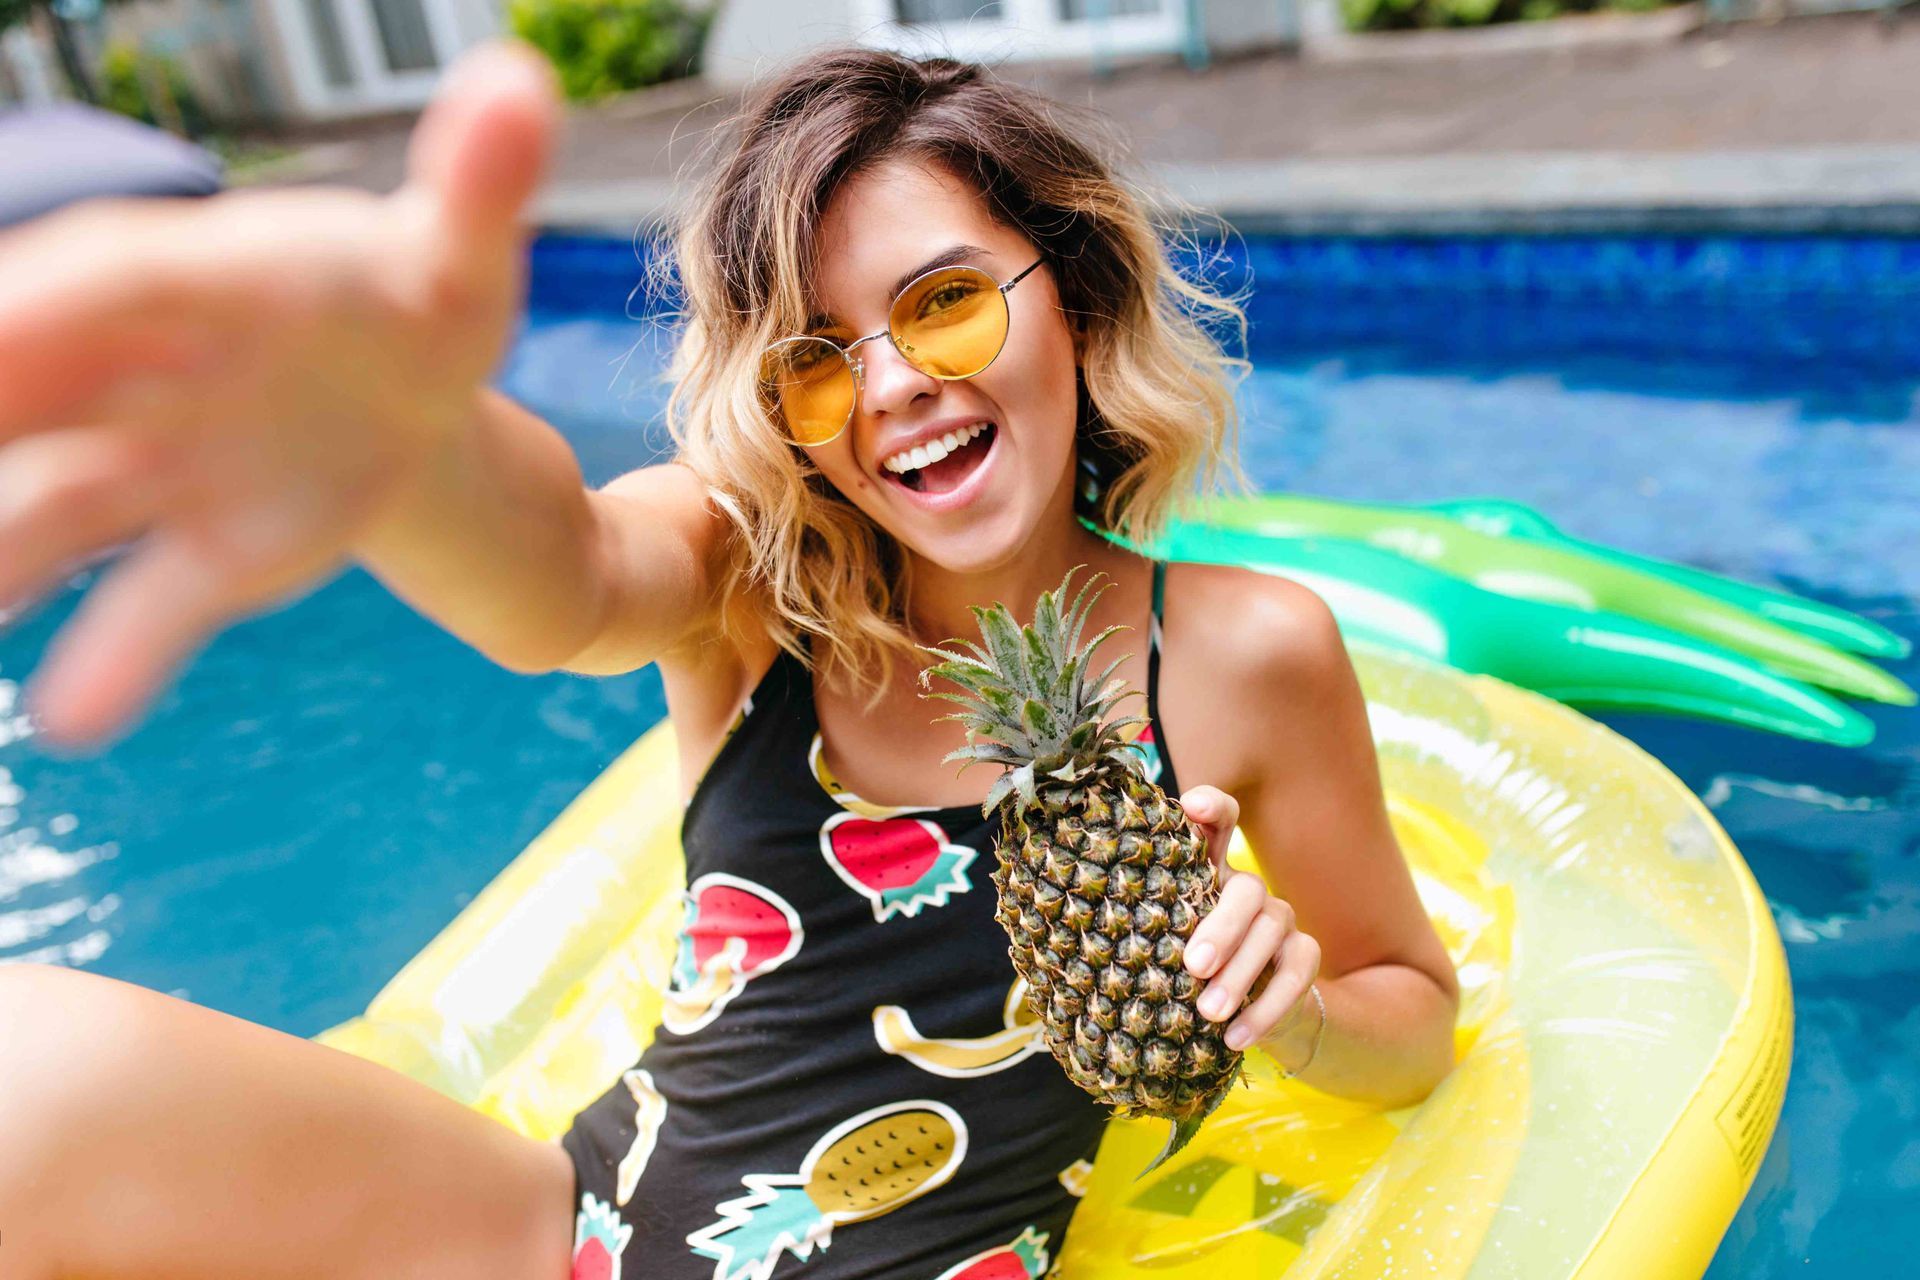 A woman on a raft in a pool holding a pineapple